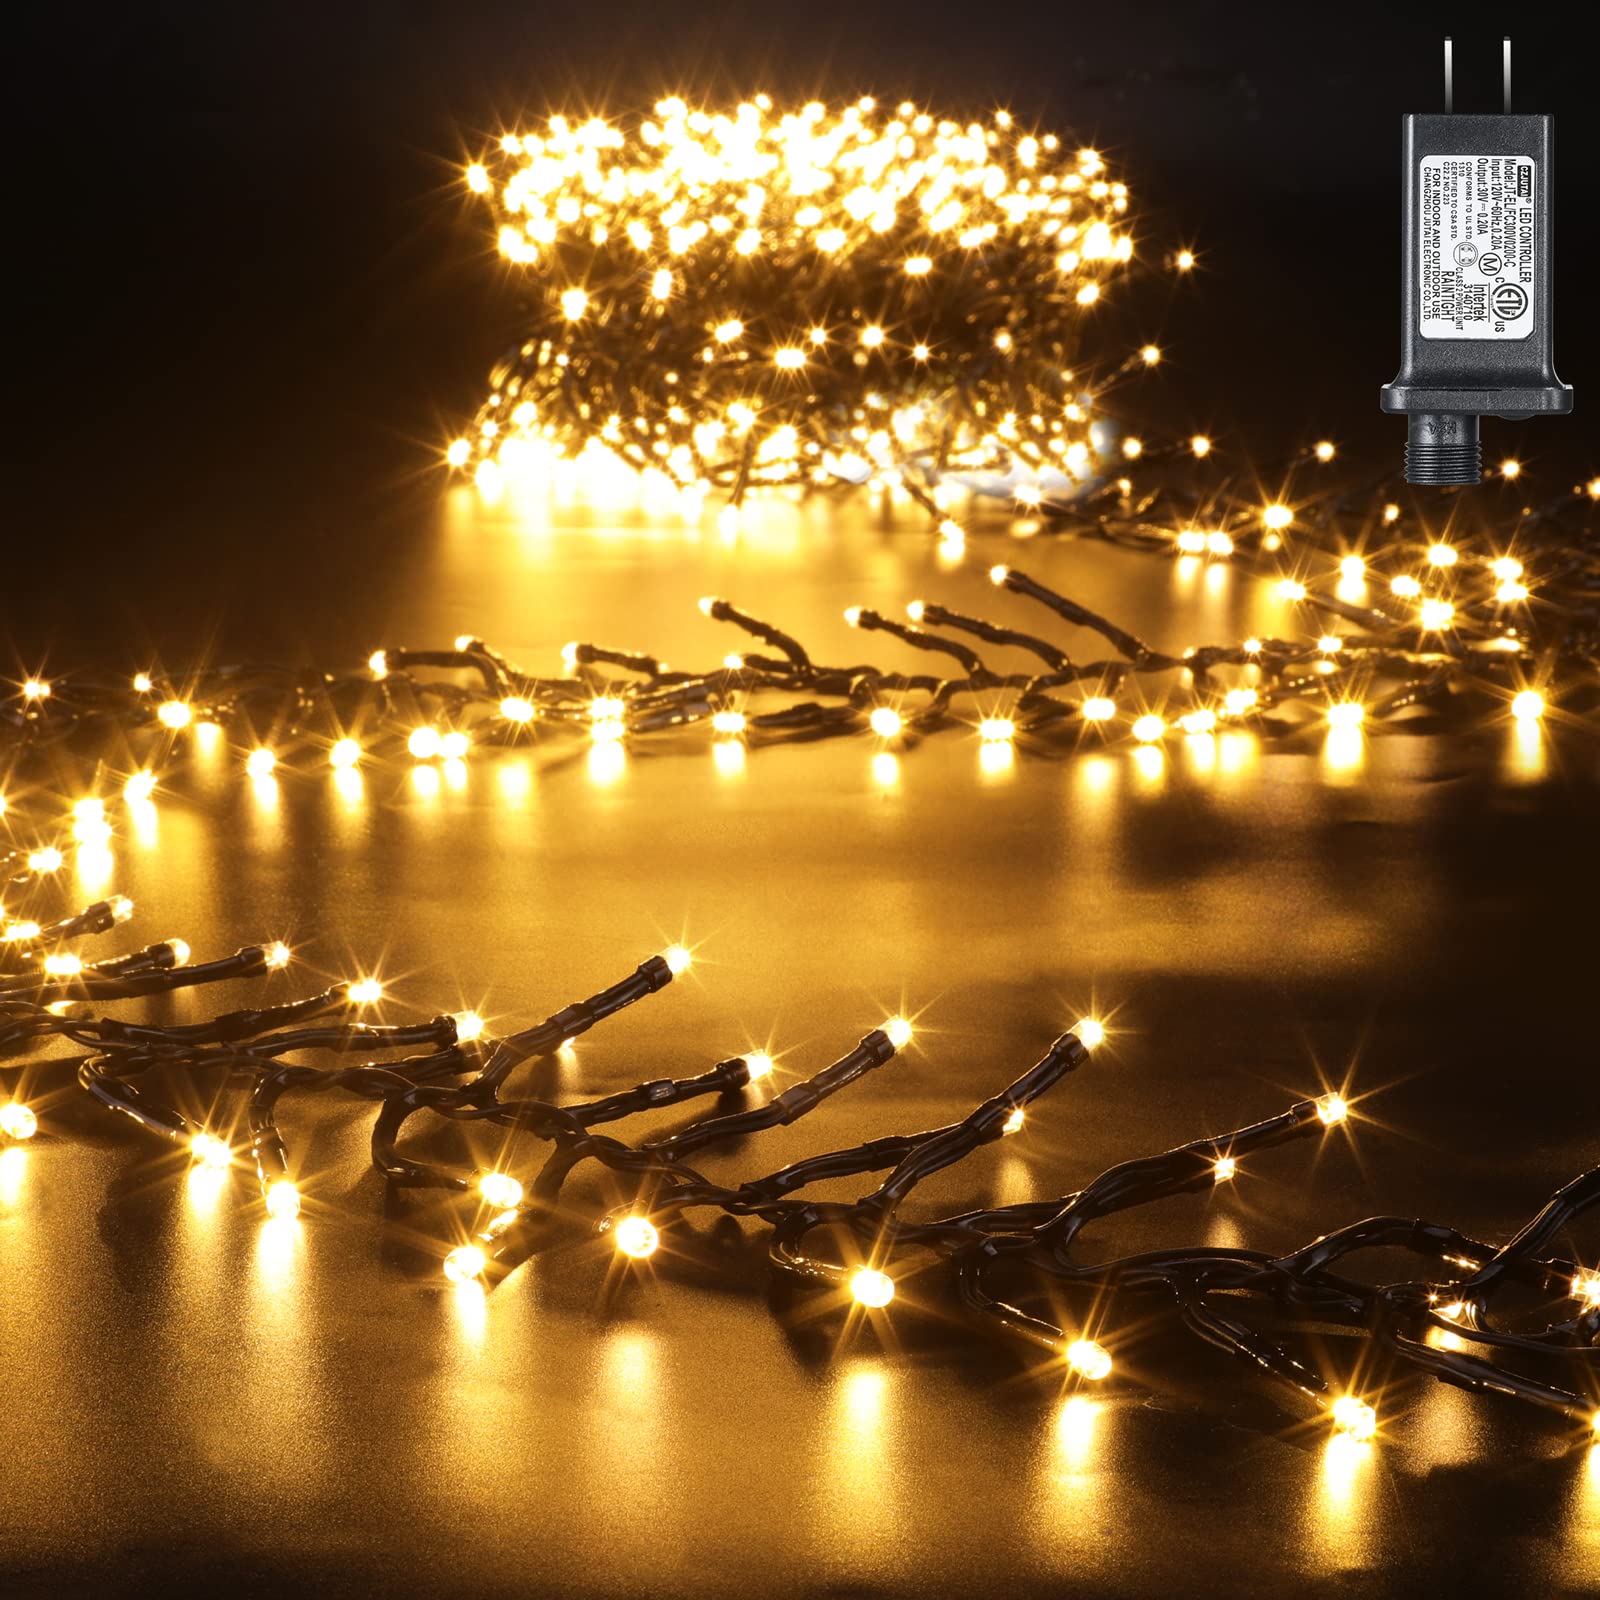 Quntis LED christmas cluster Lights, 760 LEDs 25FT Outdoor Waterproof christmas Firecrackers String Lights, 8 Modes Warm White c